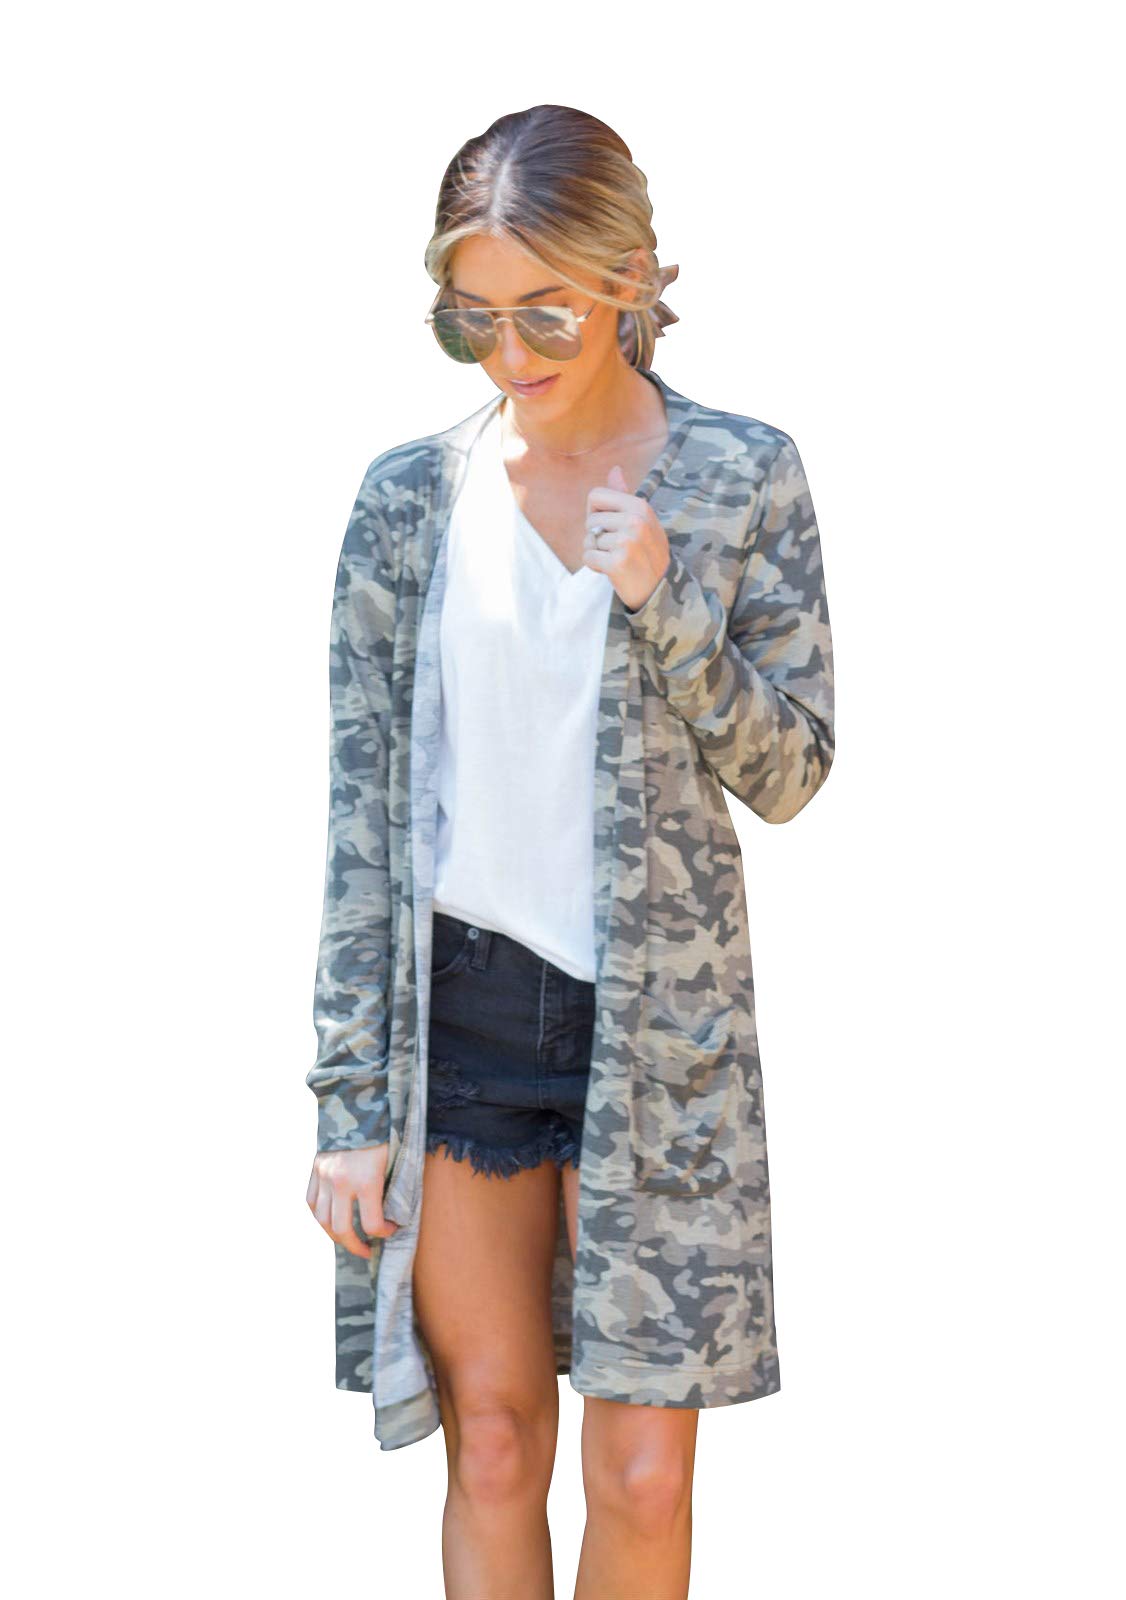 Book Cover Tickled Teal Women's Lightweight Open Front Long Sleeve Cardigan Sweater Small Camo